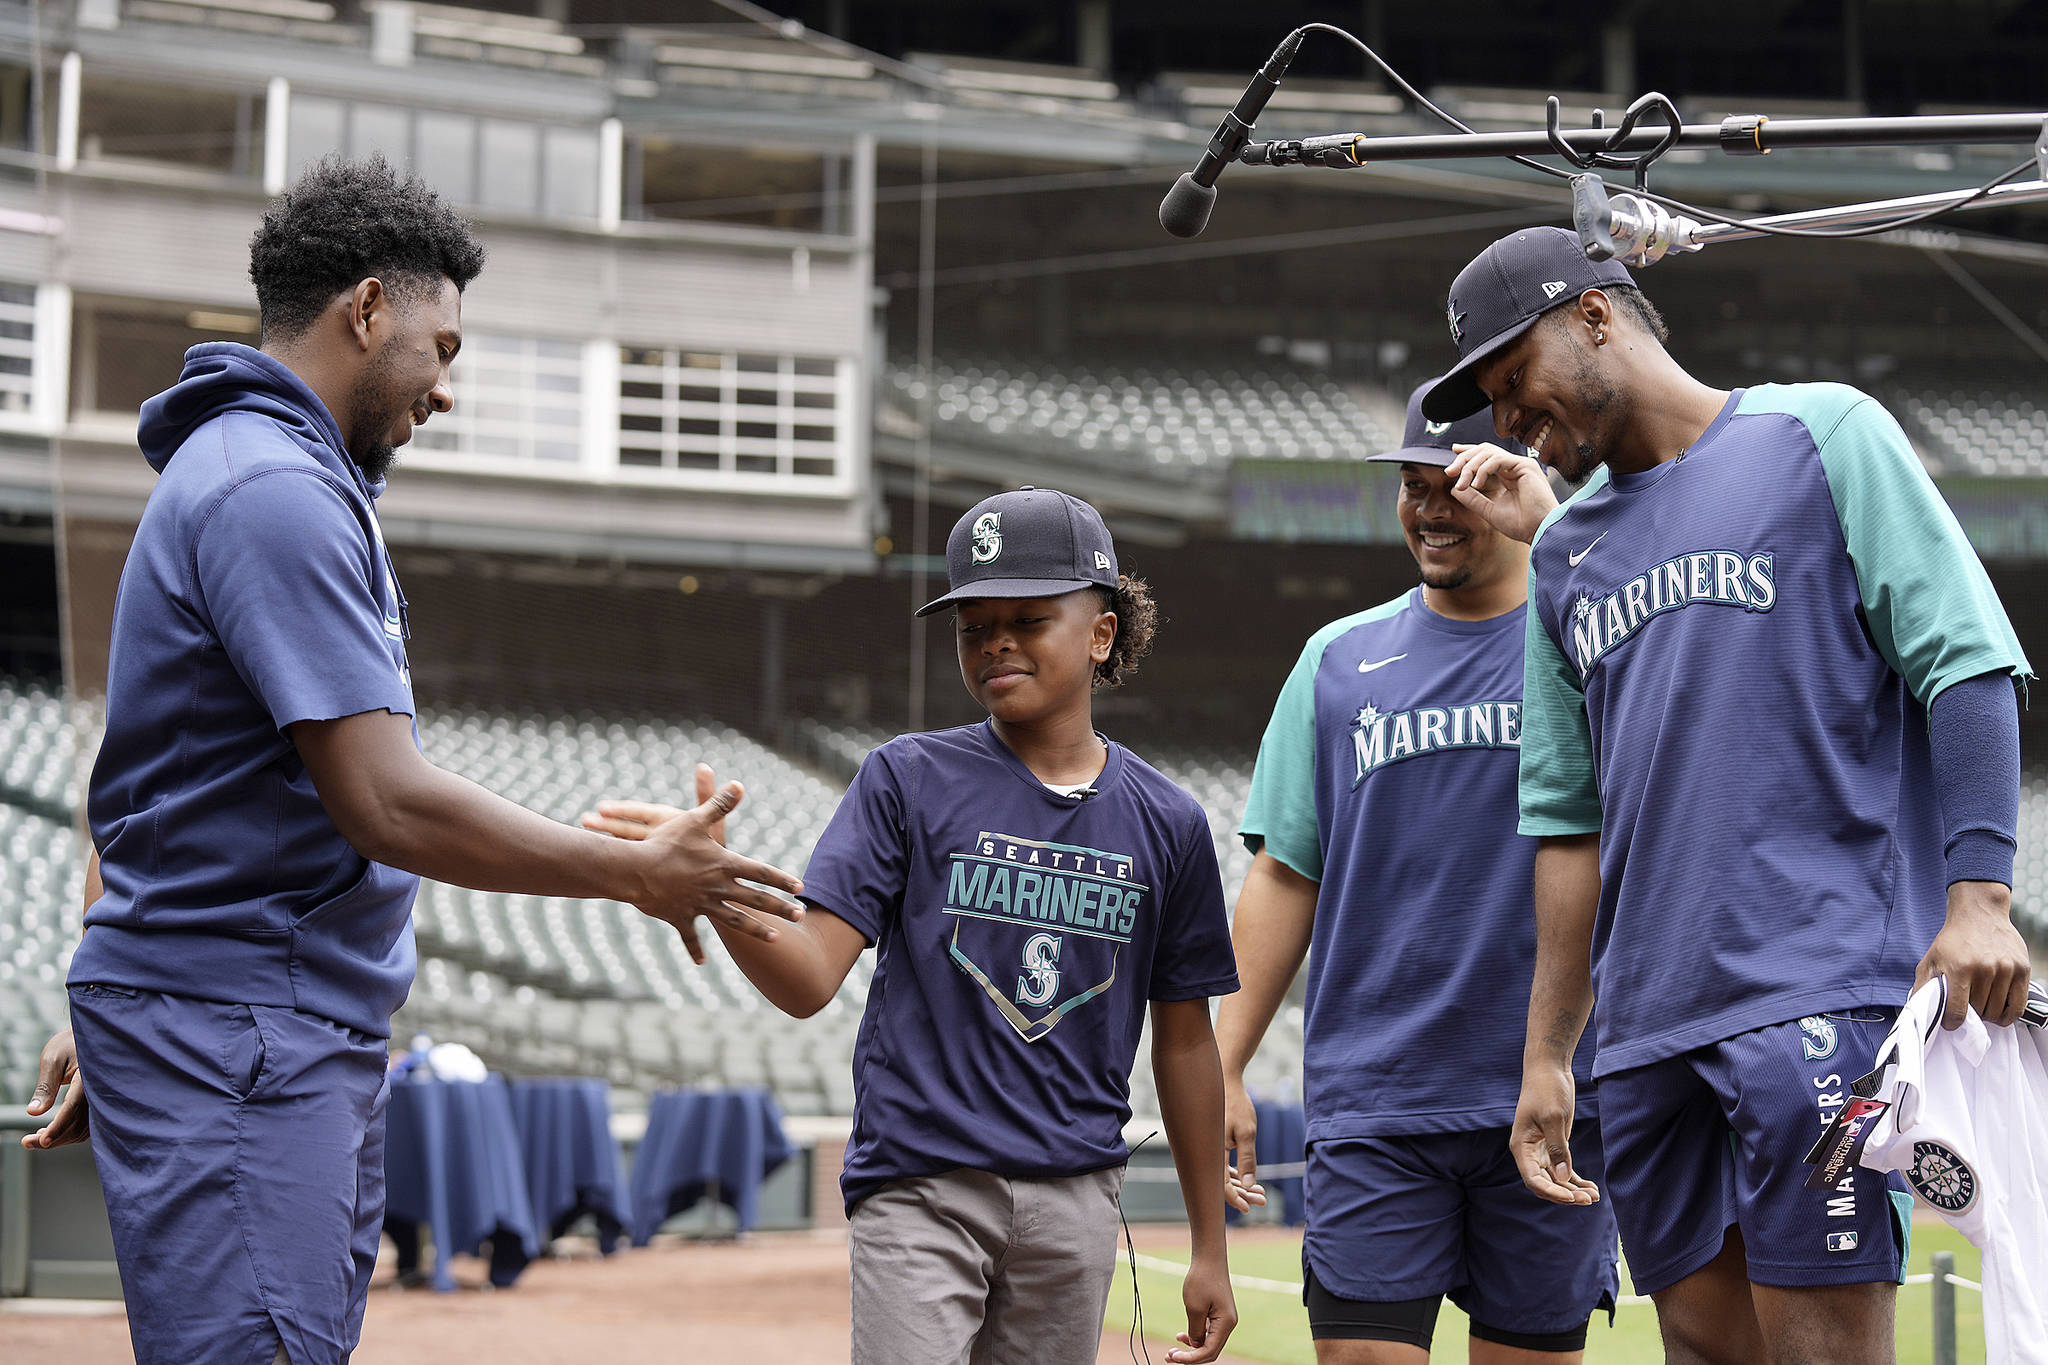 Kingston Edwards, middle, meets Mariners players Justin Dunn, Justus Sheffield and Kyle Lewis when he was announced as one of the Hometown Nine. Photo courtesy of Ben VanHouten, Seattle Mariners